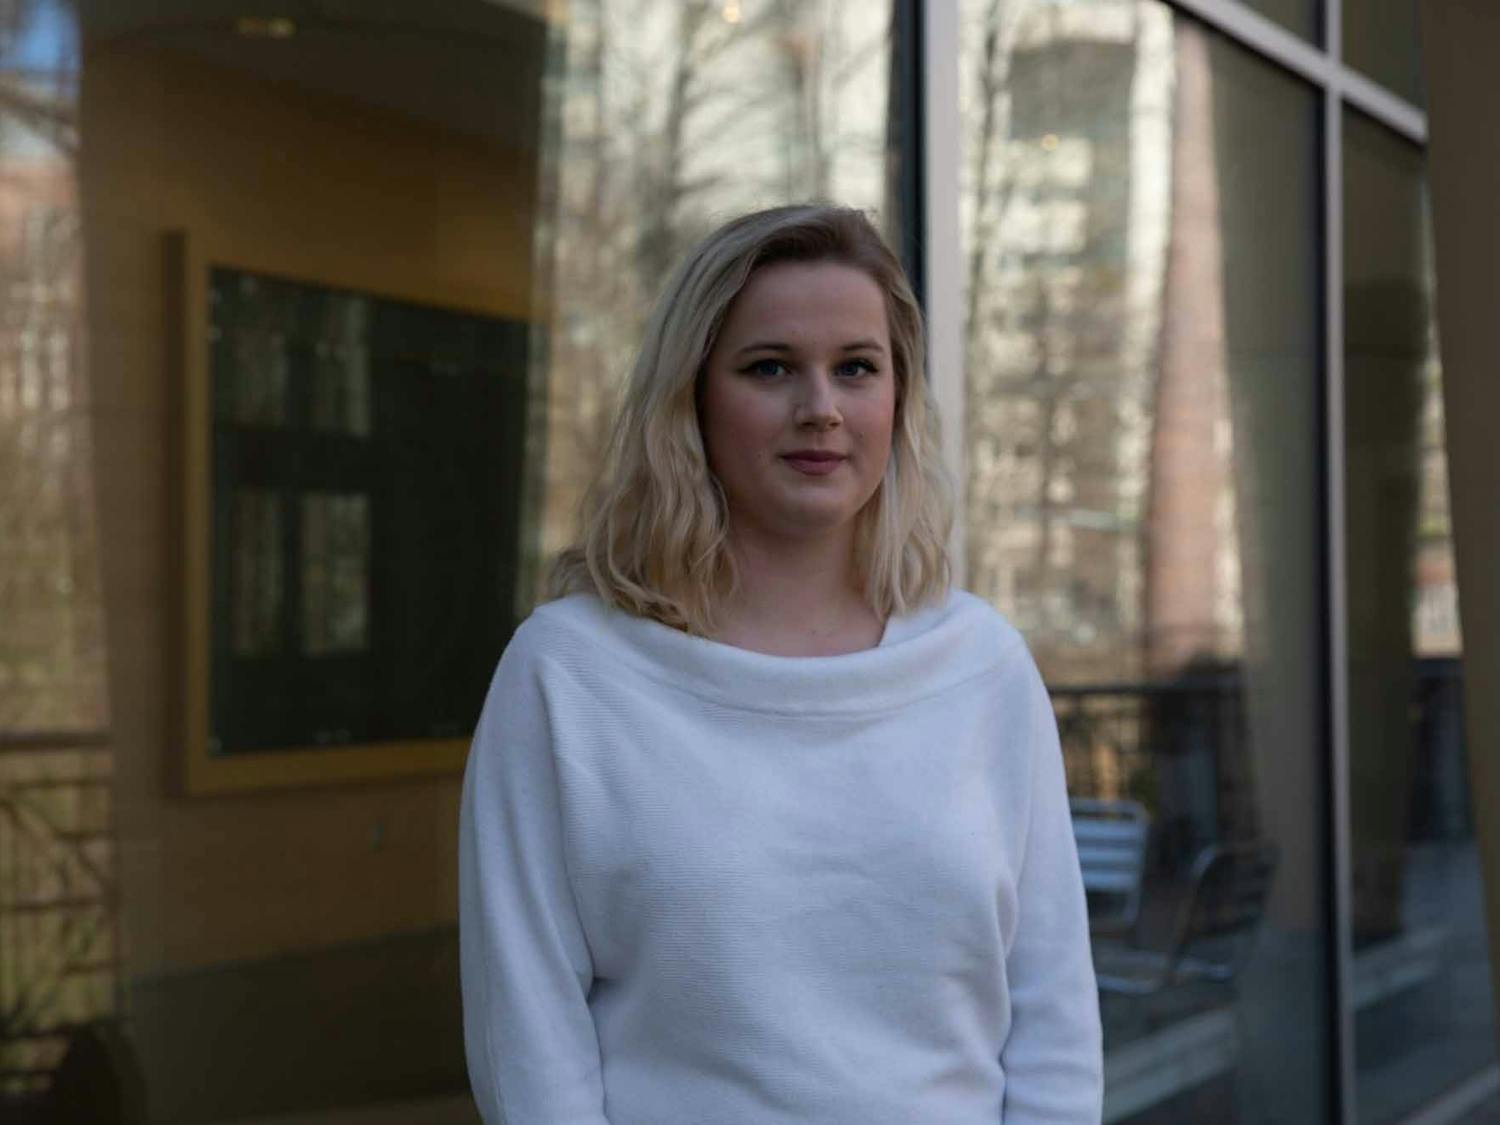 Sophomore Sam McCrary poses for a portrait in front of the Sonja Haynes Stone Center on Friday, Feb. 6, 2020. She is one of the the 29 Delta Advocates on campus, a group who are trained to response to survivors of gender-based violence or harassment.